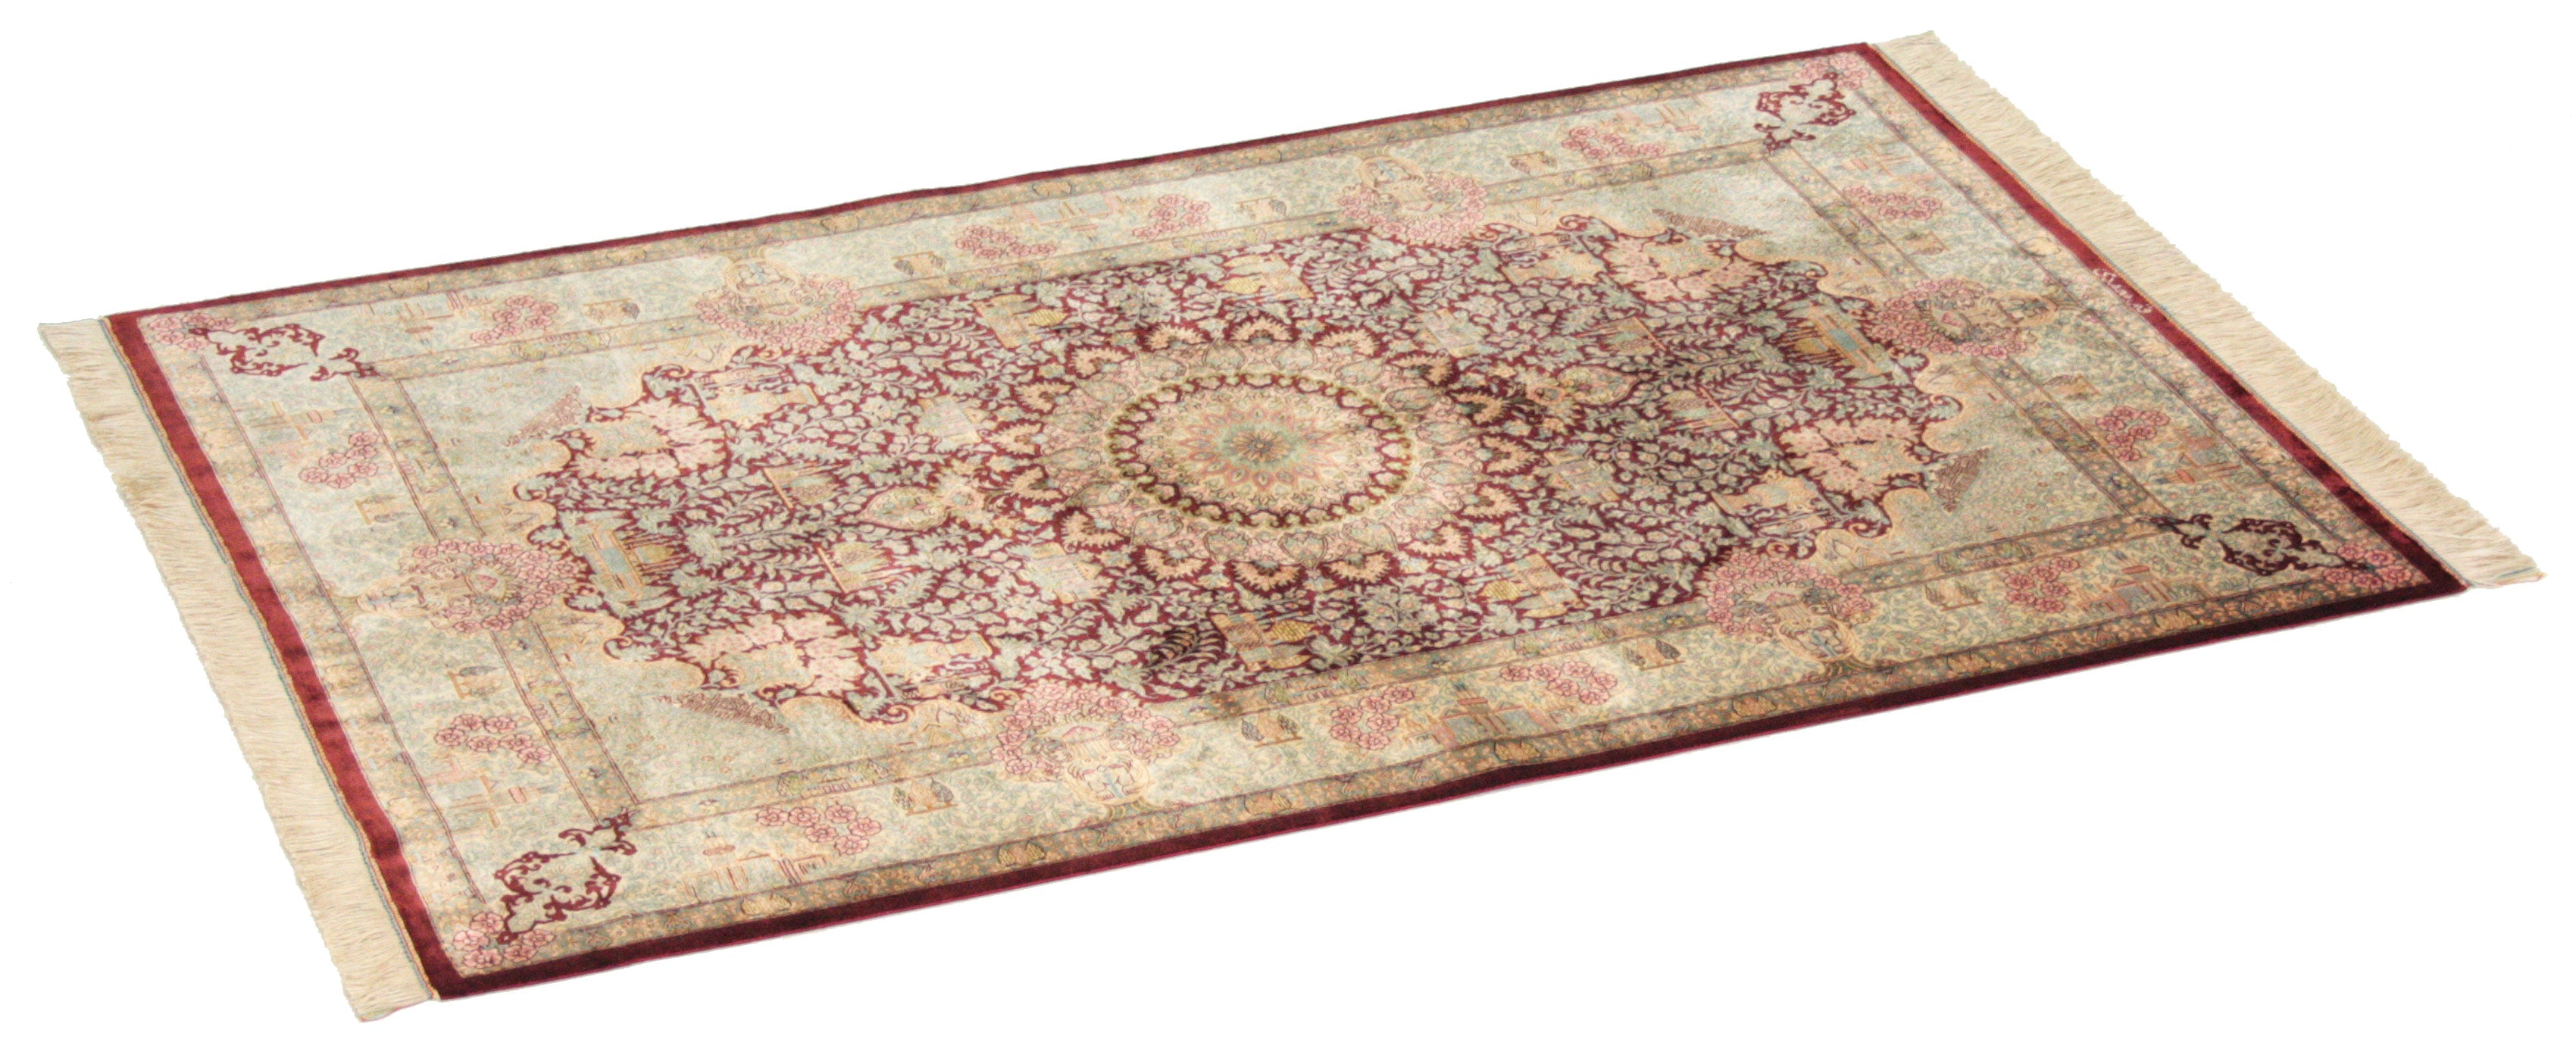 Authentic persian rug with a traditional design in red and beige